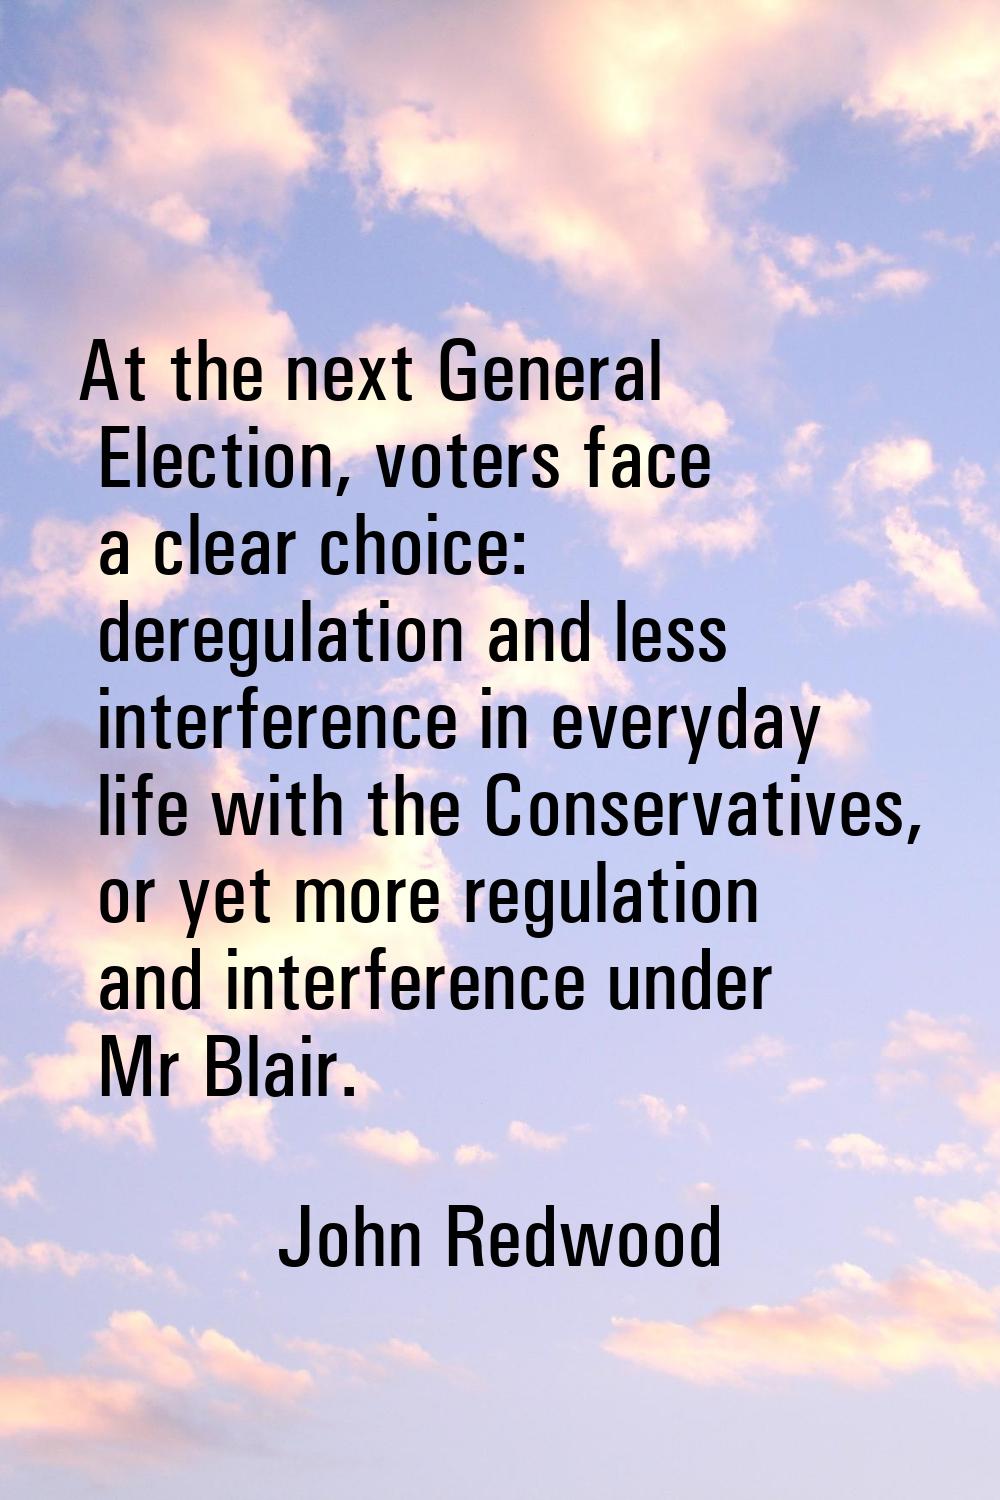 At the next General Election, voters face a clear choice: deregulation and less interference in eve